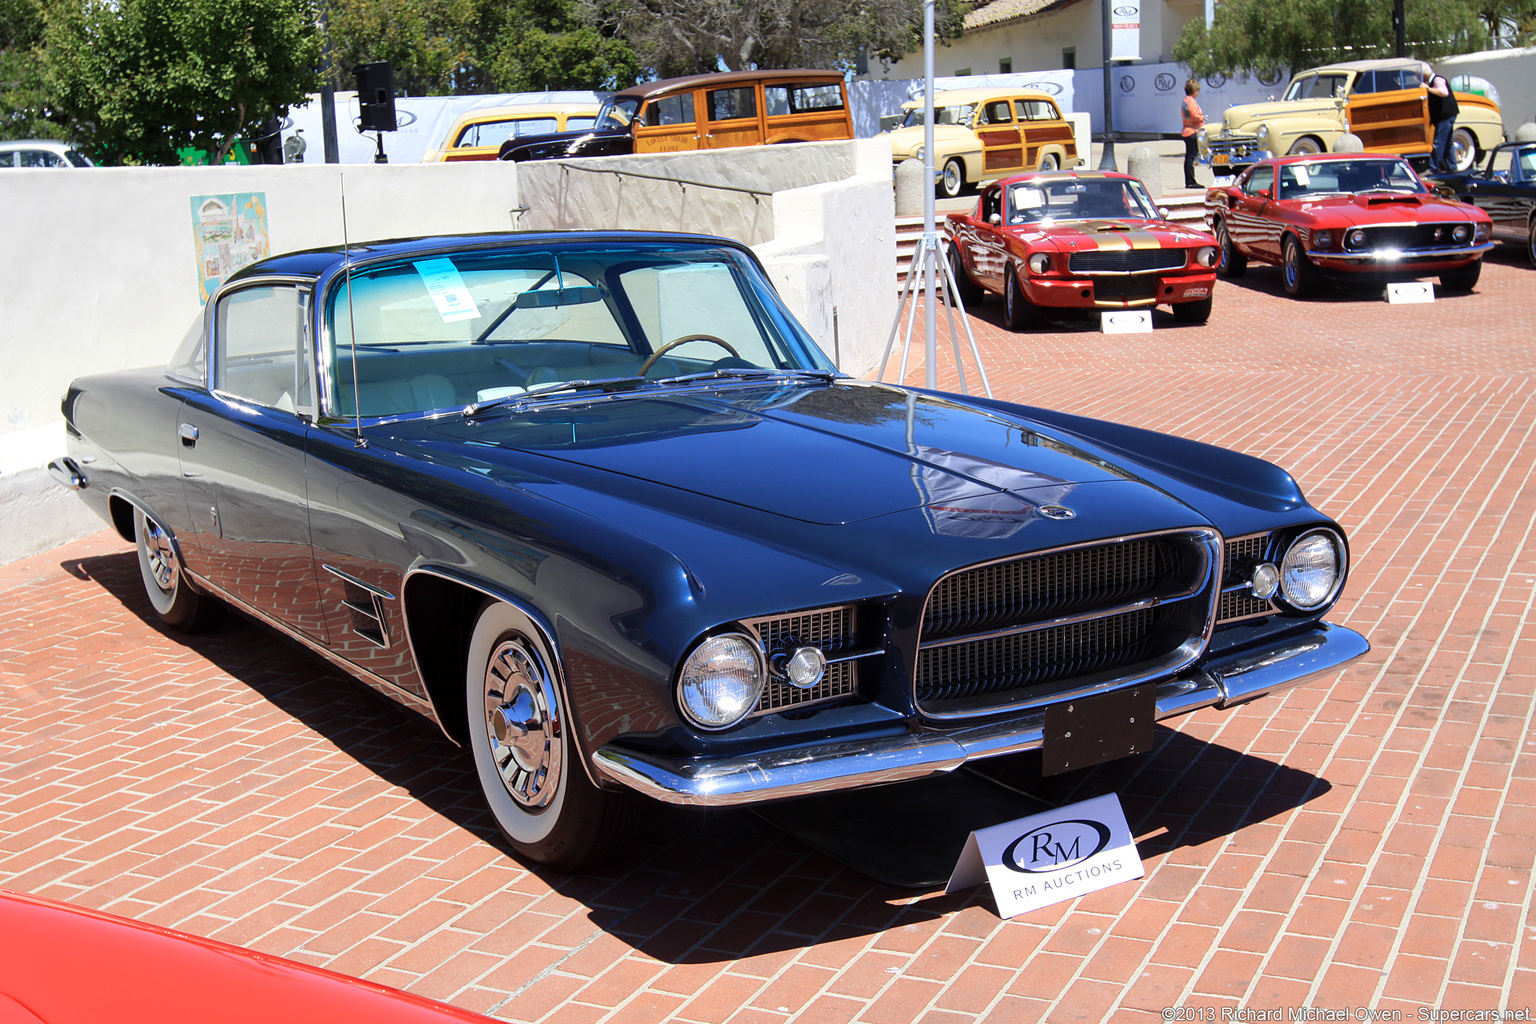 2013 Monterey Auction by RM Auctions